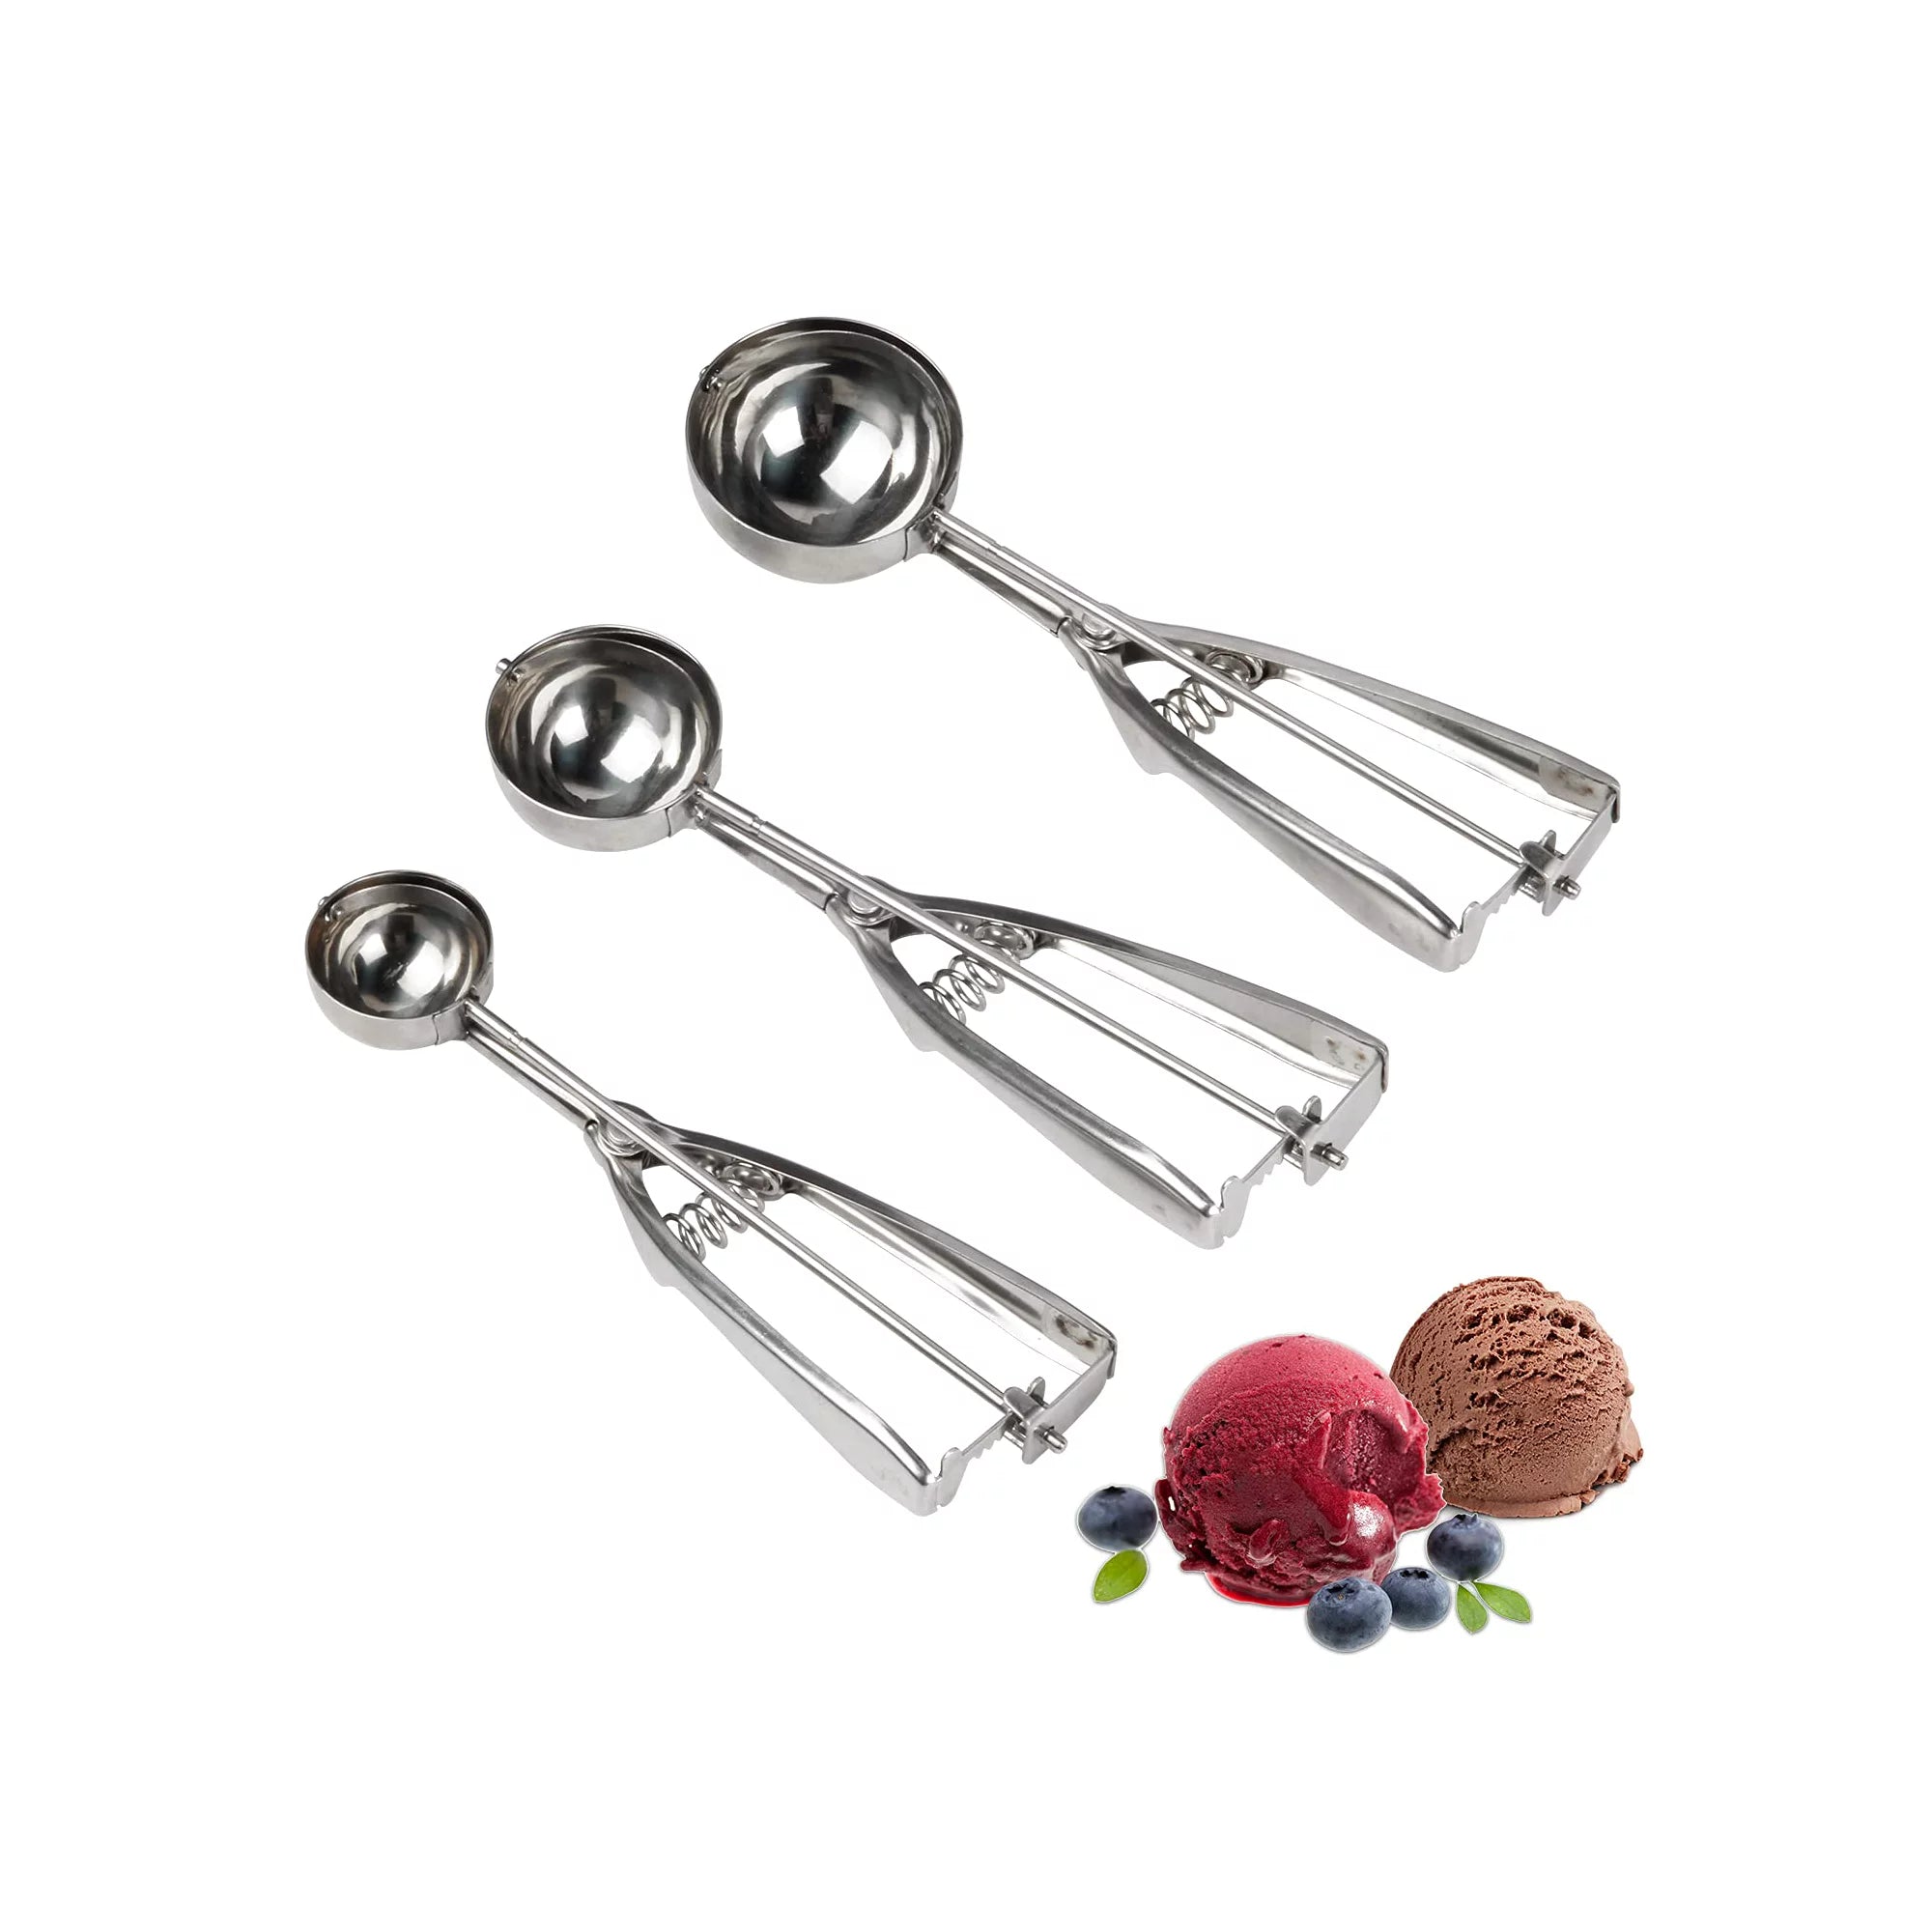 Cookie Scoop Set, Ice Cream Scoop Set, Ice Cream Scoops Trigger Include  Large Medium Small Size Cookie Scoop, Polishing Stainless Steel 18/8 Melon